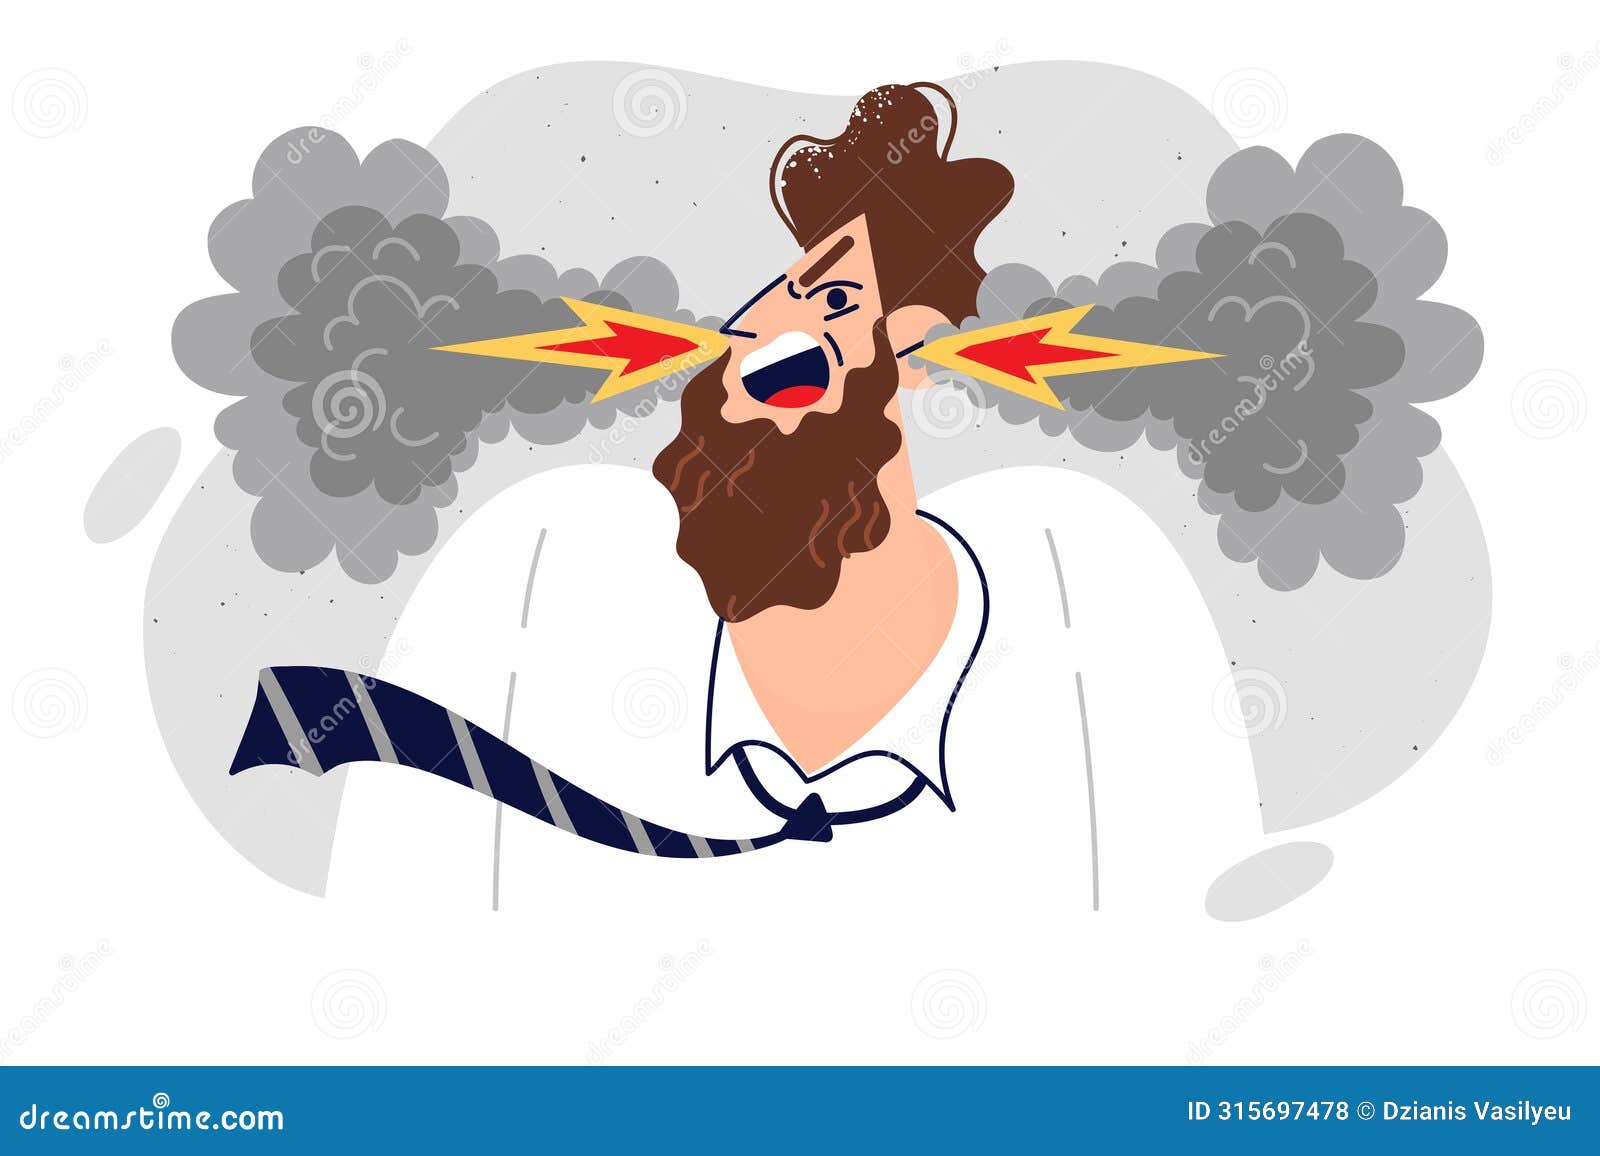 nervous man screams, experiencing irritation and aggression, blows smoke and flames from ears